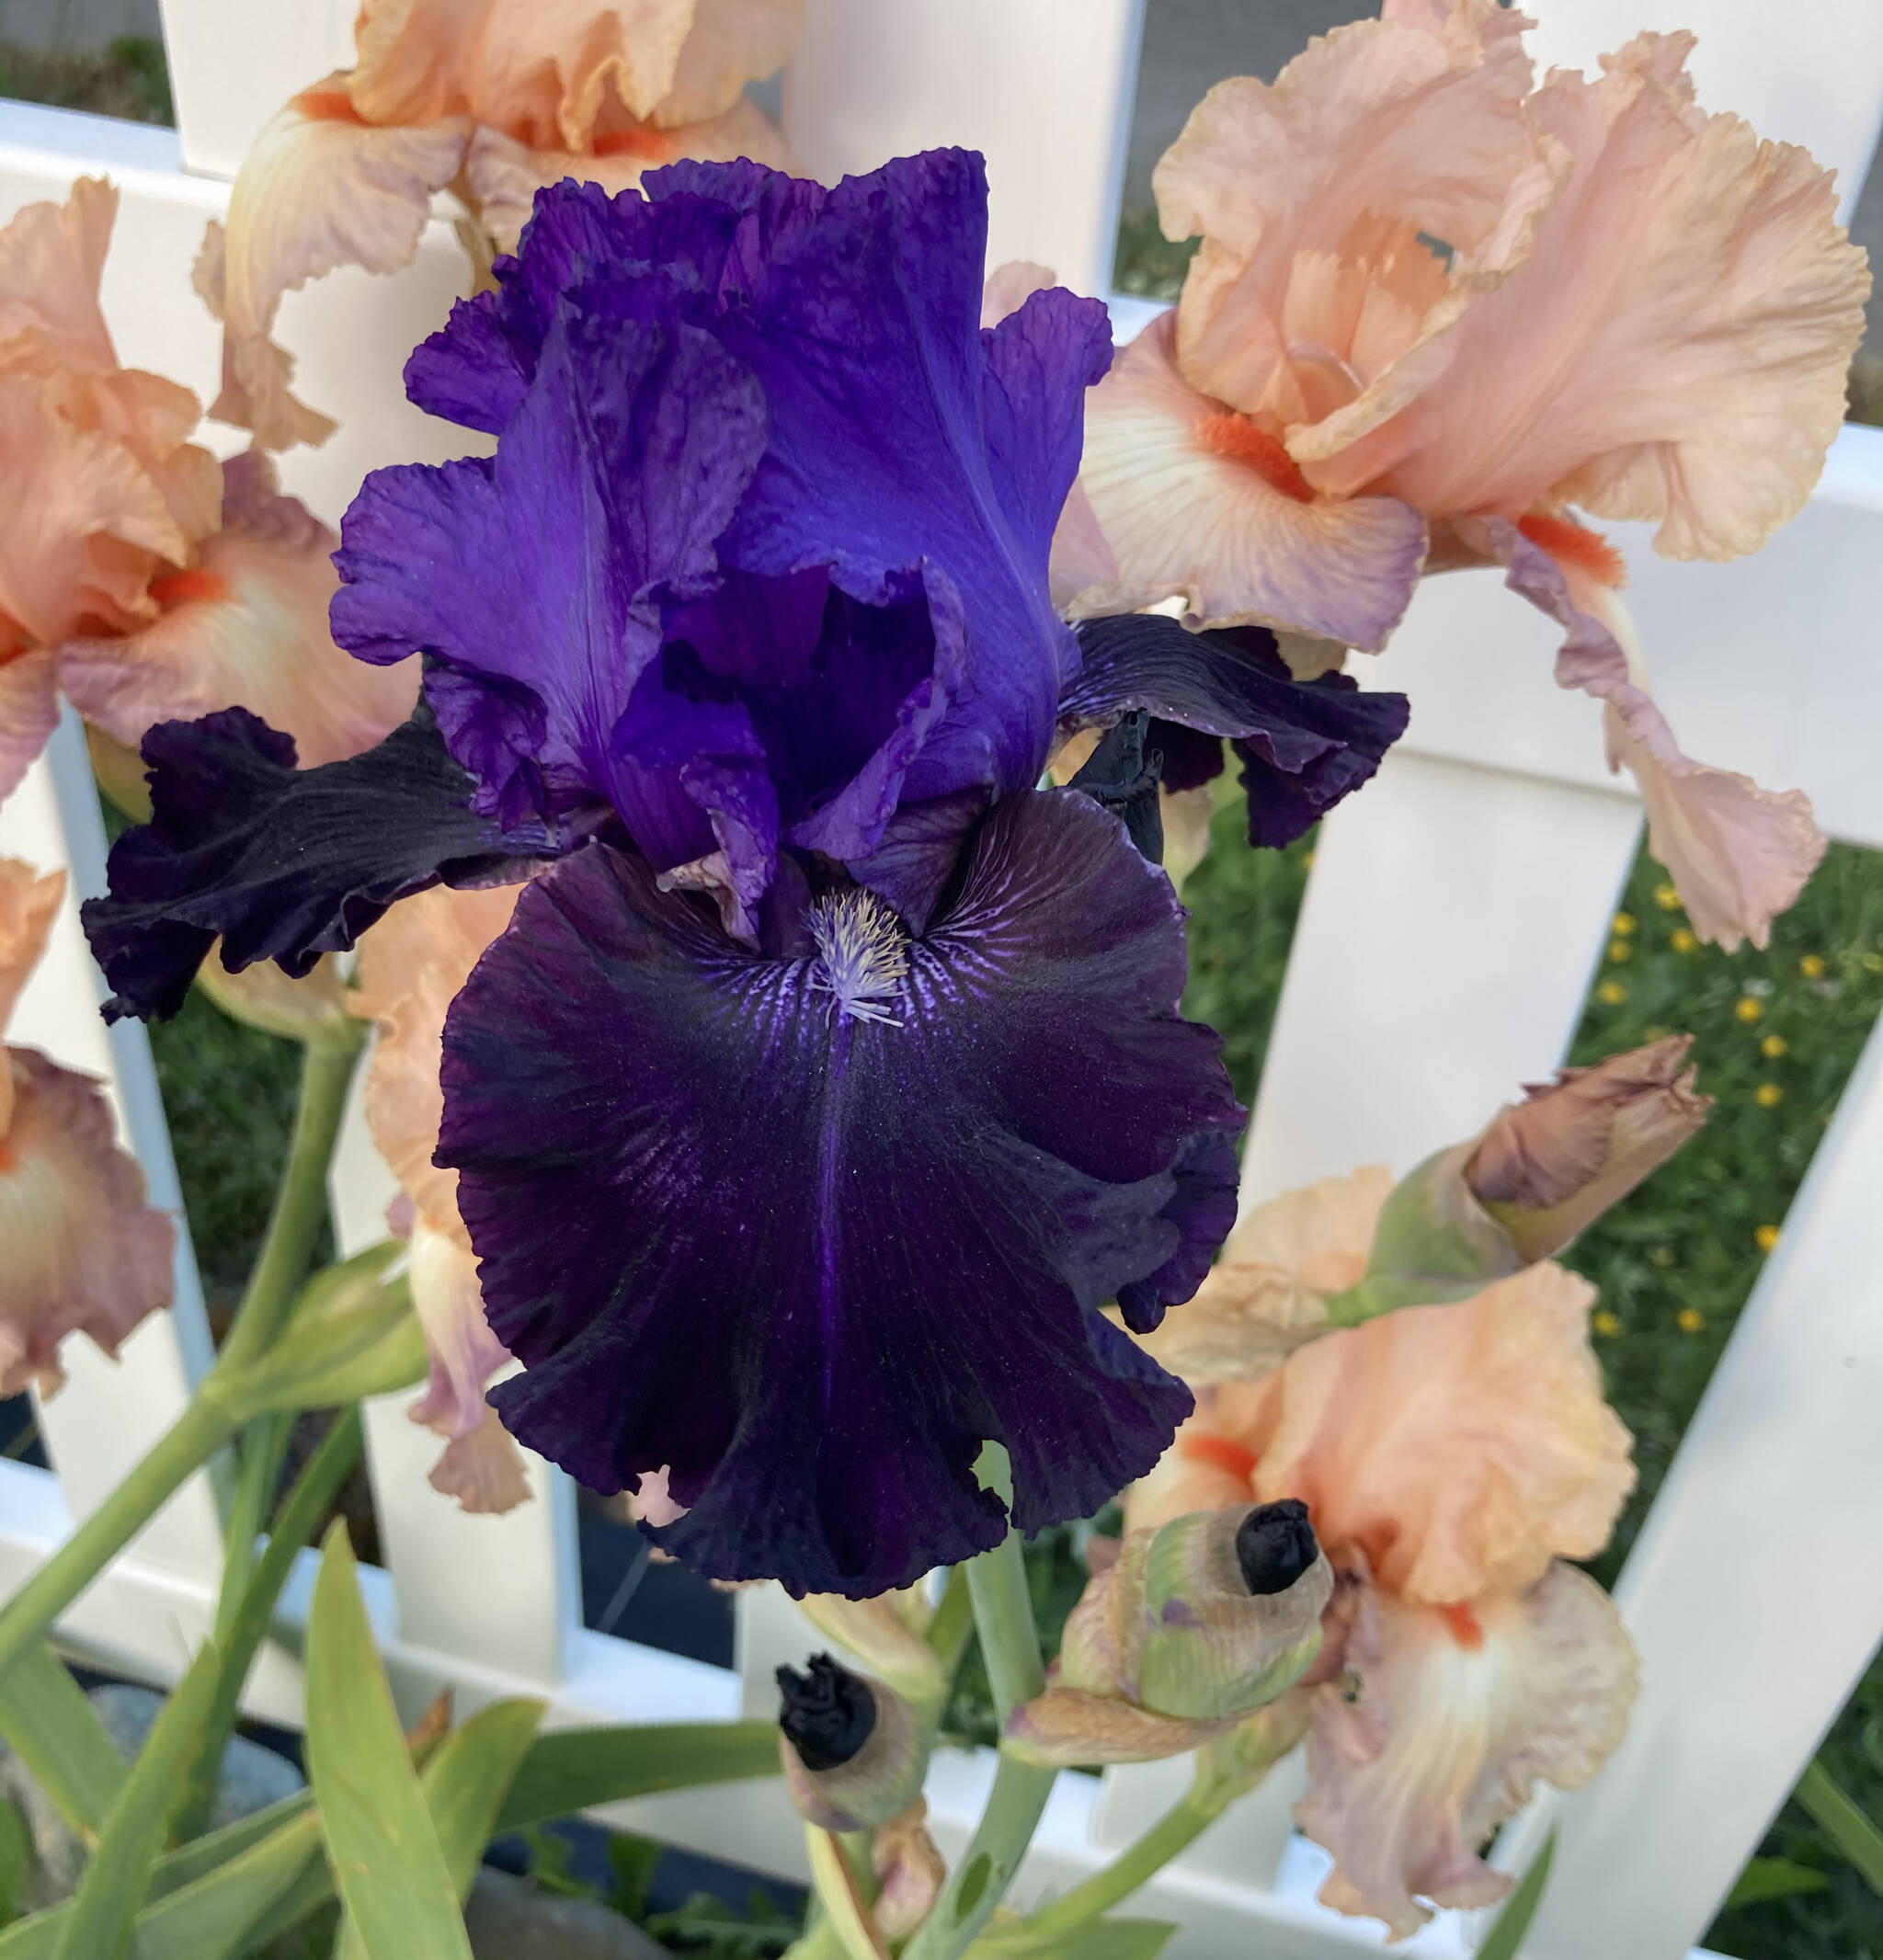 Join iris expert Ross “Rusty” BeVier for the Clallam County Master Gardeners’ Green Thumb Gardening Tips Zoom presentation, “Types of Iris and Their Propagation” on May 12. Photo by Ross BeVier